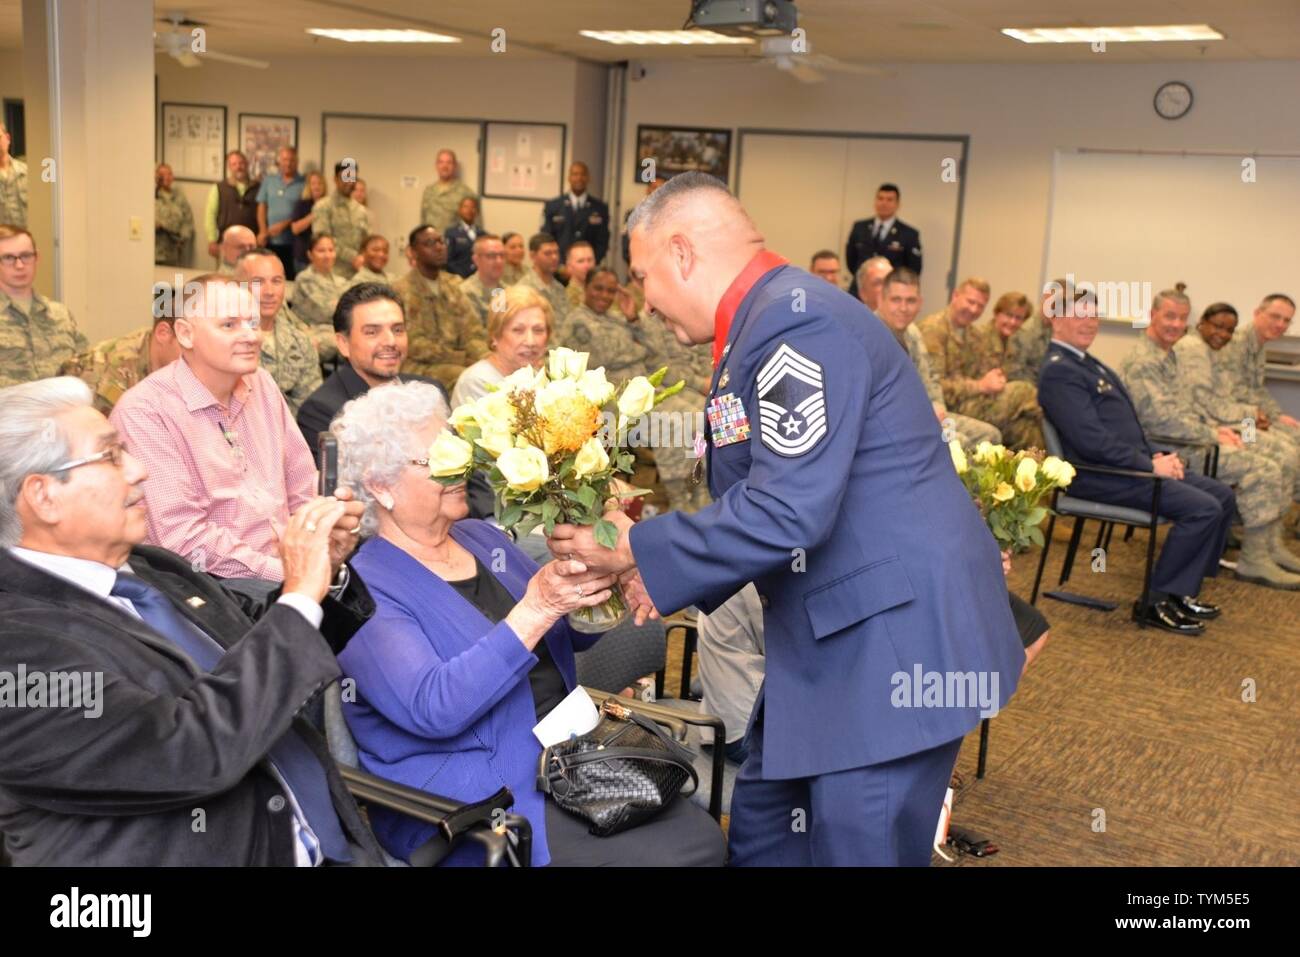 Chief Master Sgt. Anthony G. Jimenez retires from the Texas Air National Guard after 28 years of service during his retirement cereomy held here Nov. 17, 2018.  More than 60 family, friends and coworkers attended to support Jimenez as he closes the chapter in his military career. Stock Photo